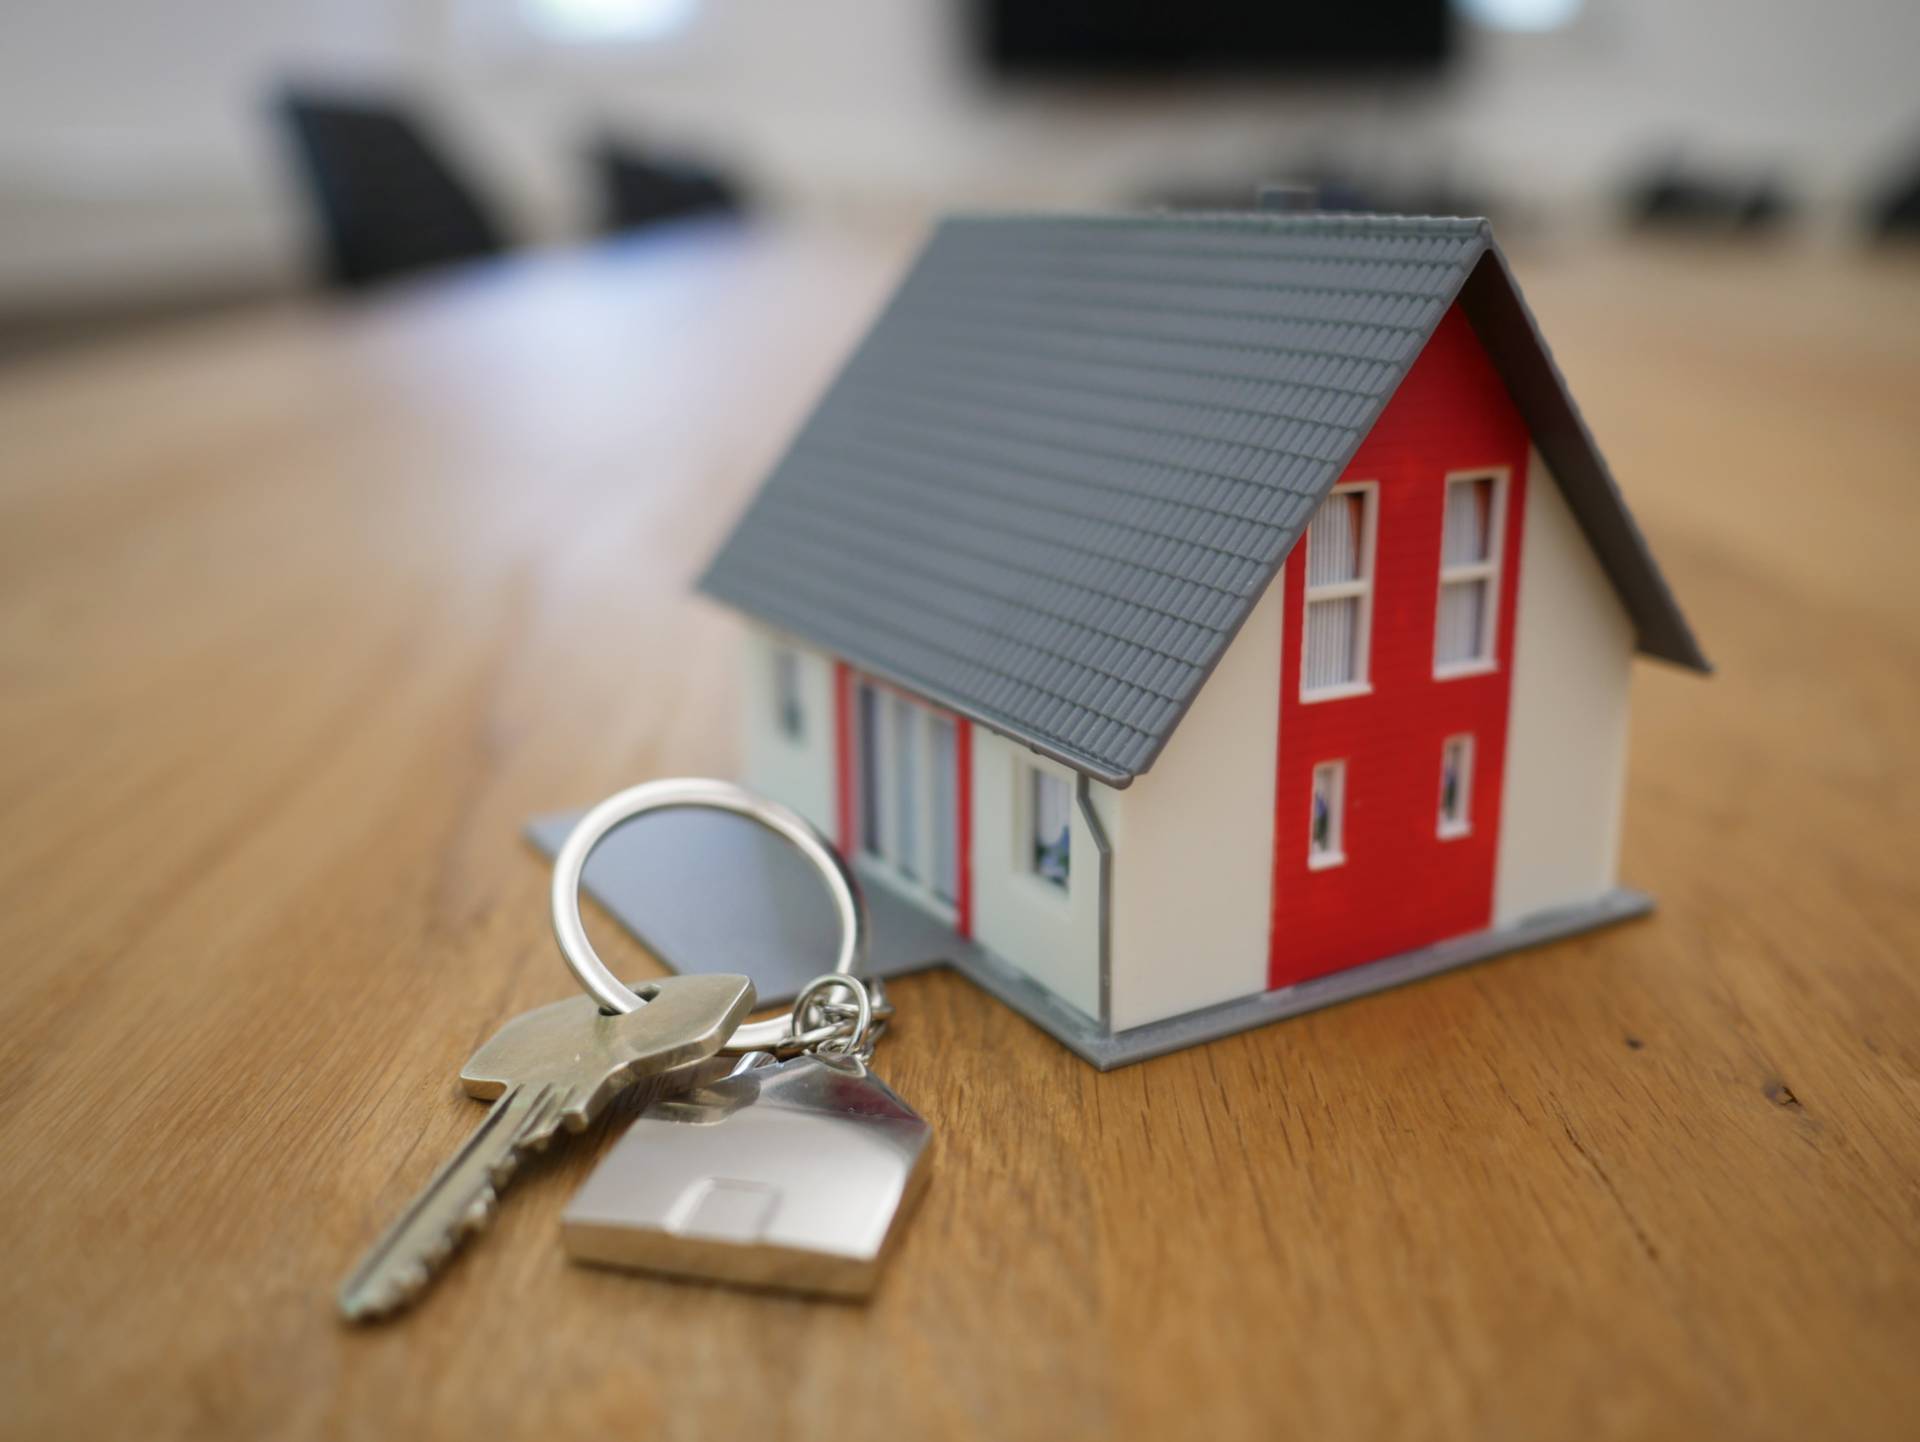 miniature toy house next to set of keys on table